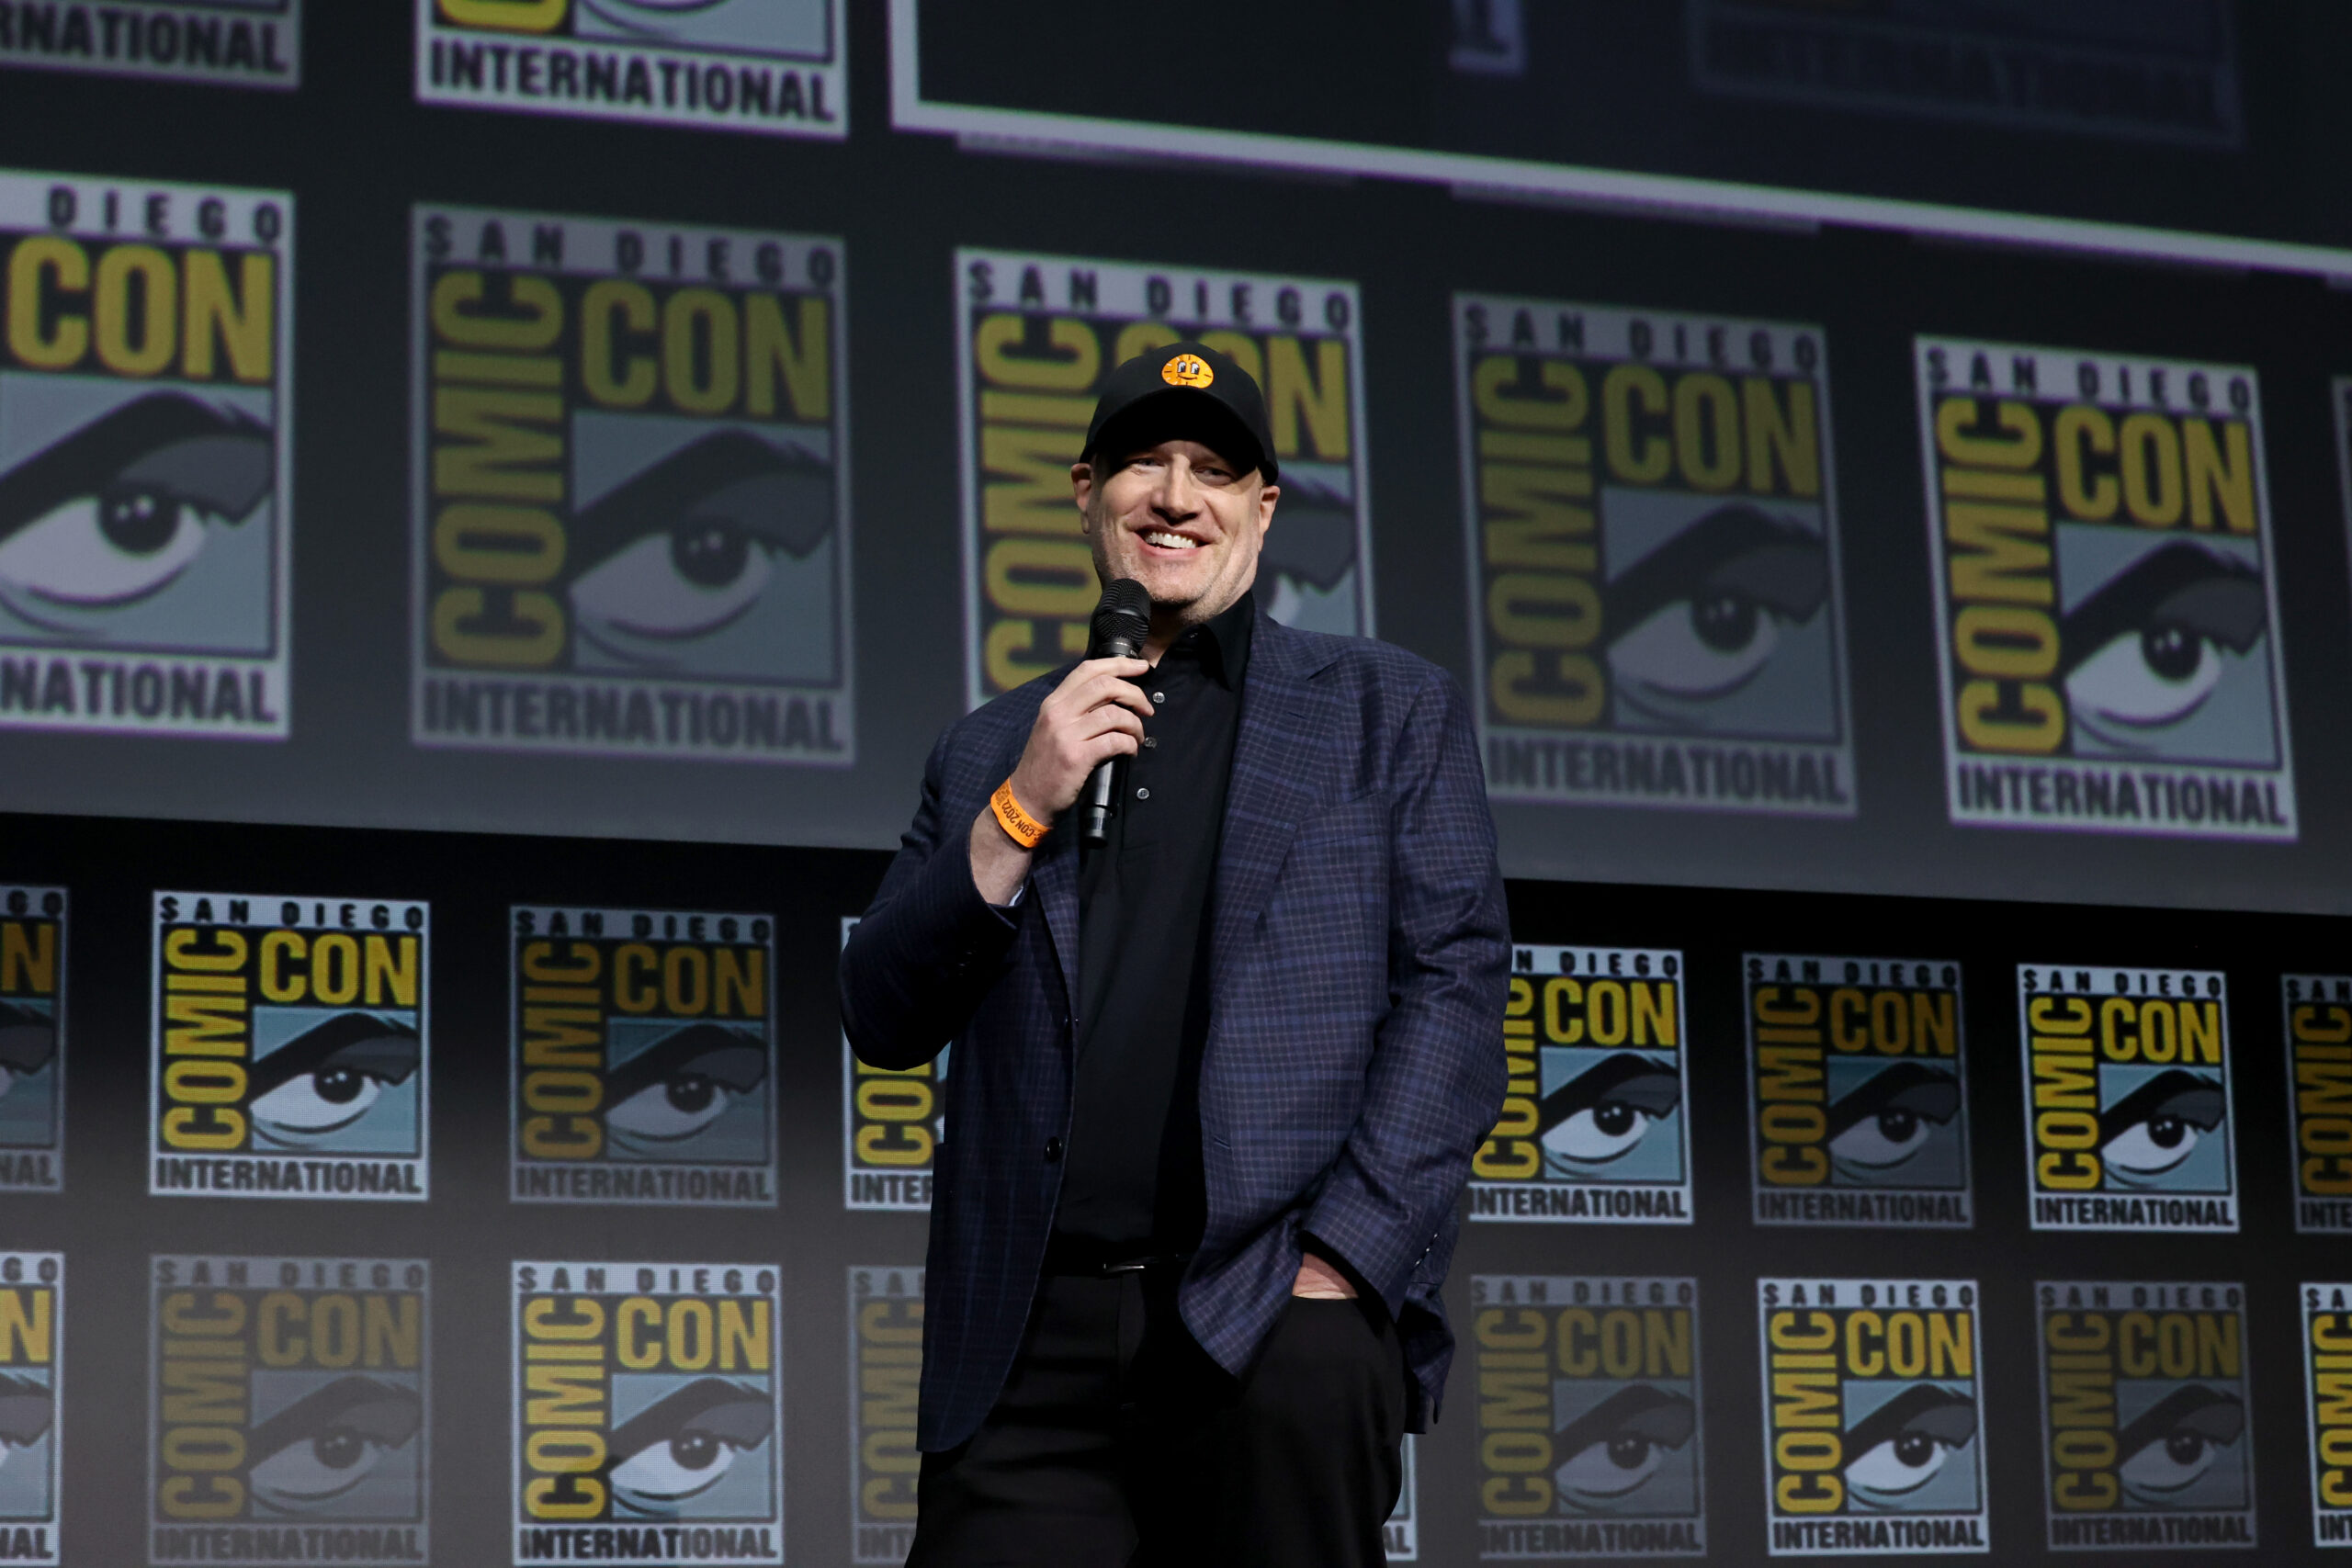 Supernatural – Street – Cosmic – The Three Sides Of The MCU Says Feige